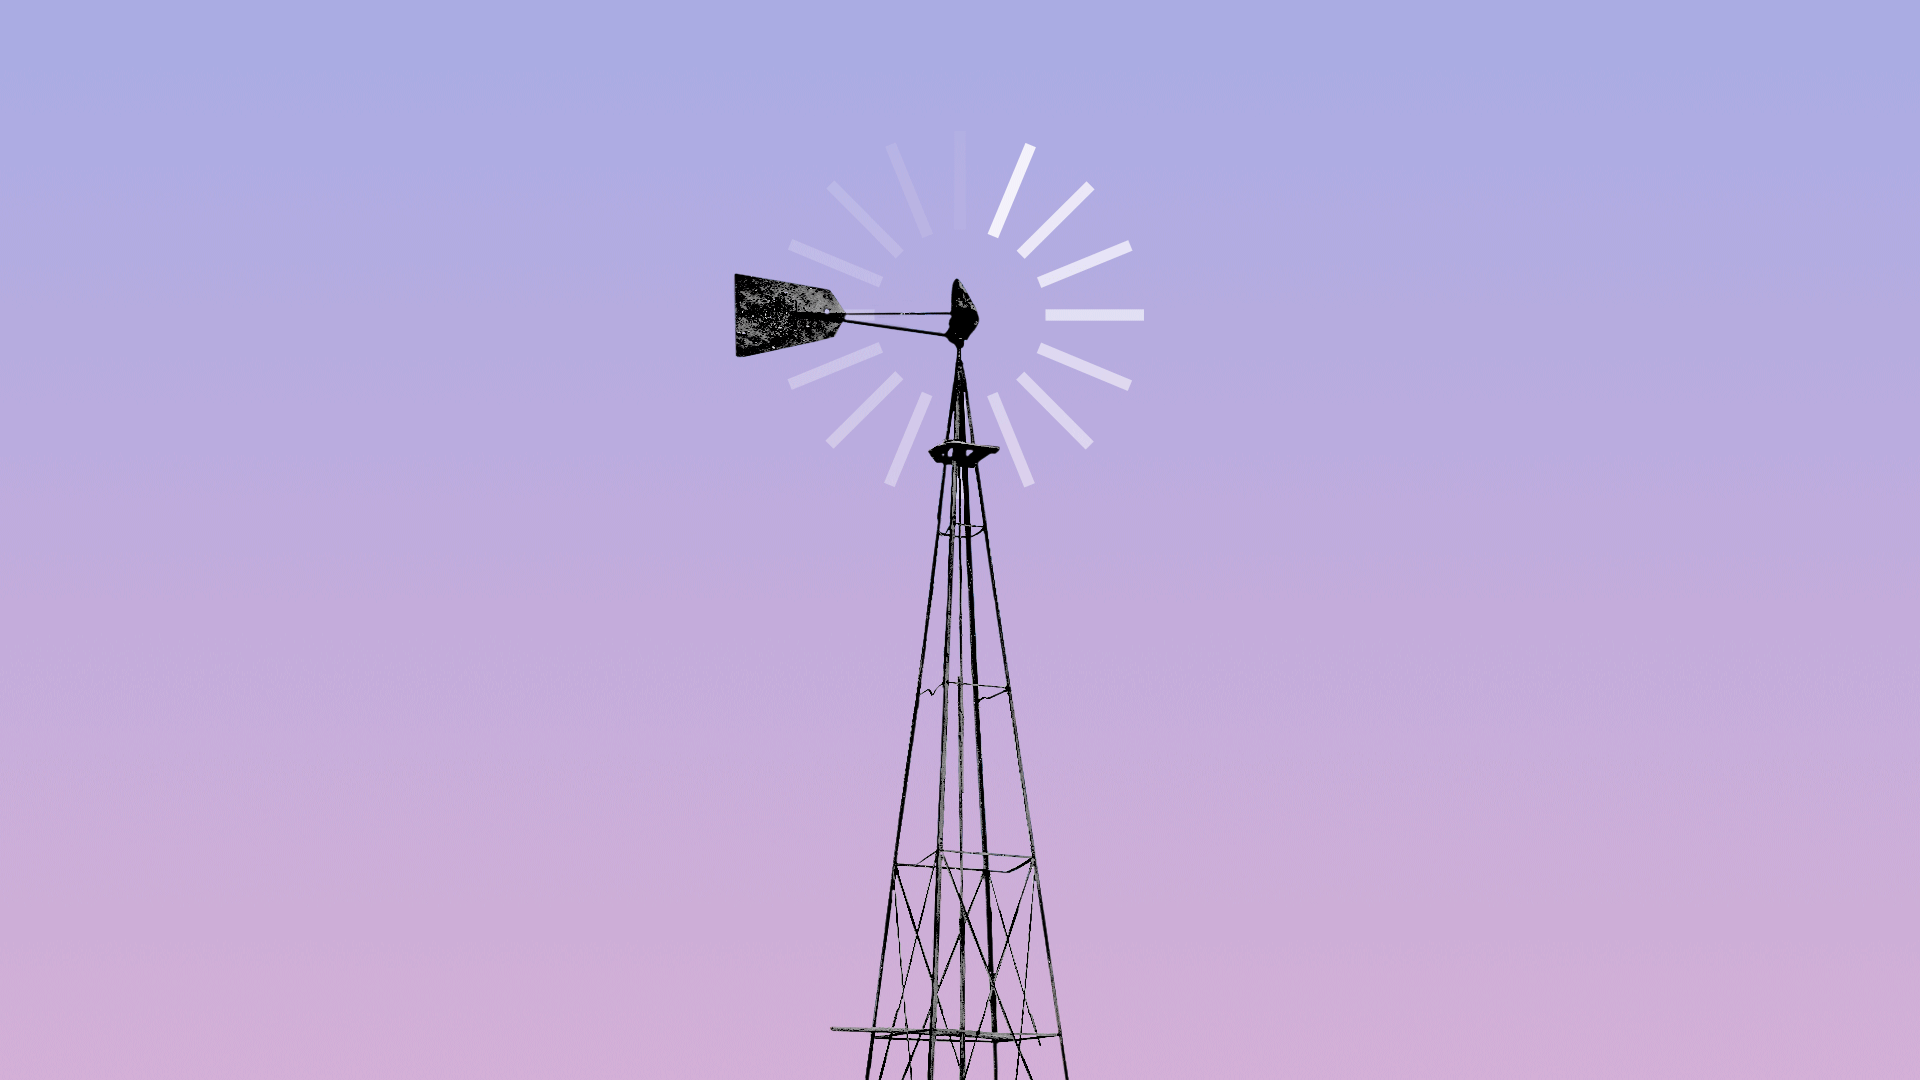 Animated illustration of a metal windmill with a loading circle as its blades